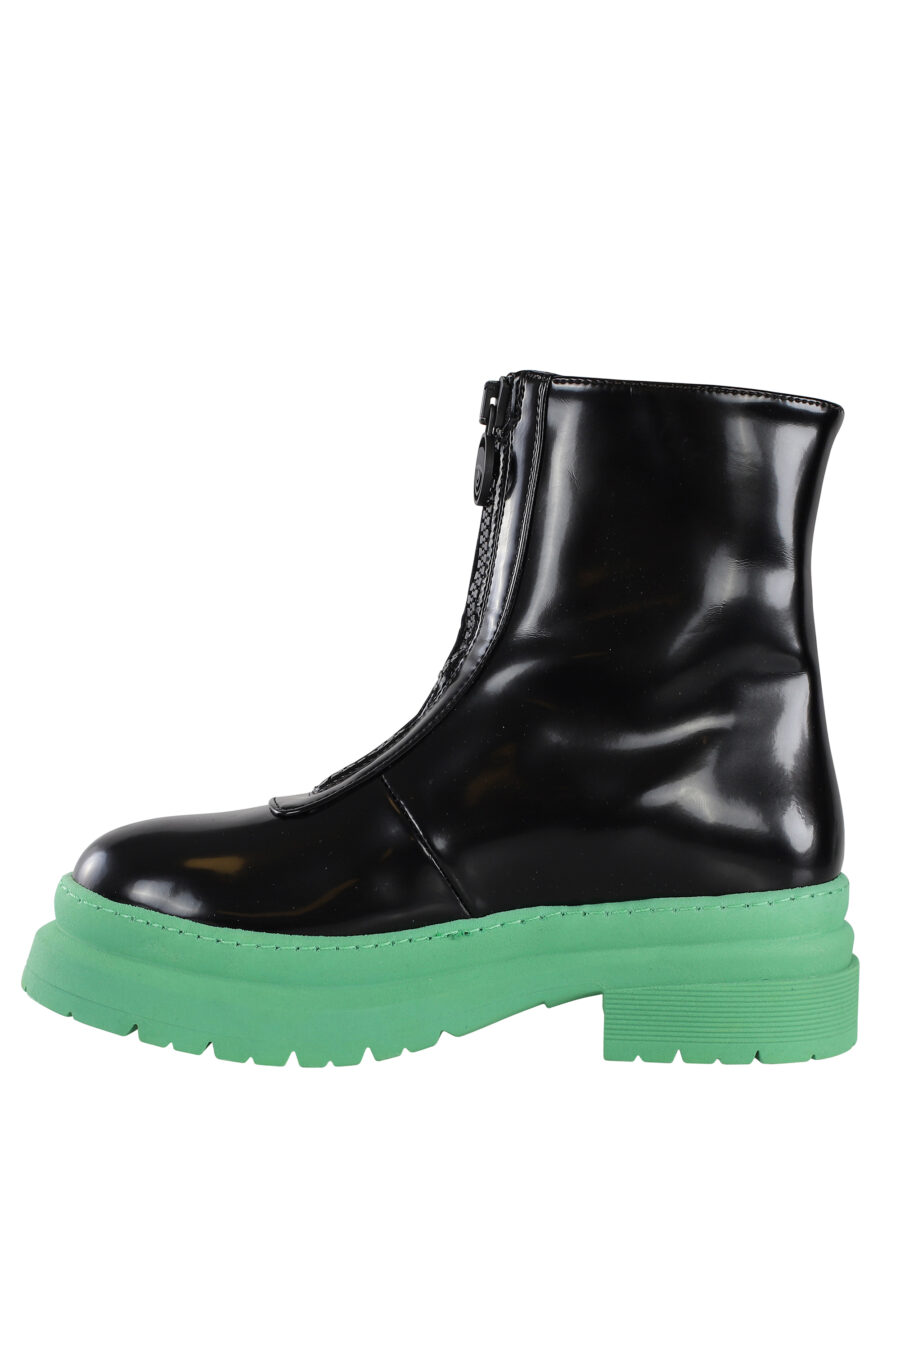 Black vegan leather ankle boots with green sole - IMG 6874